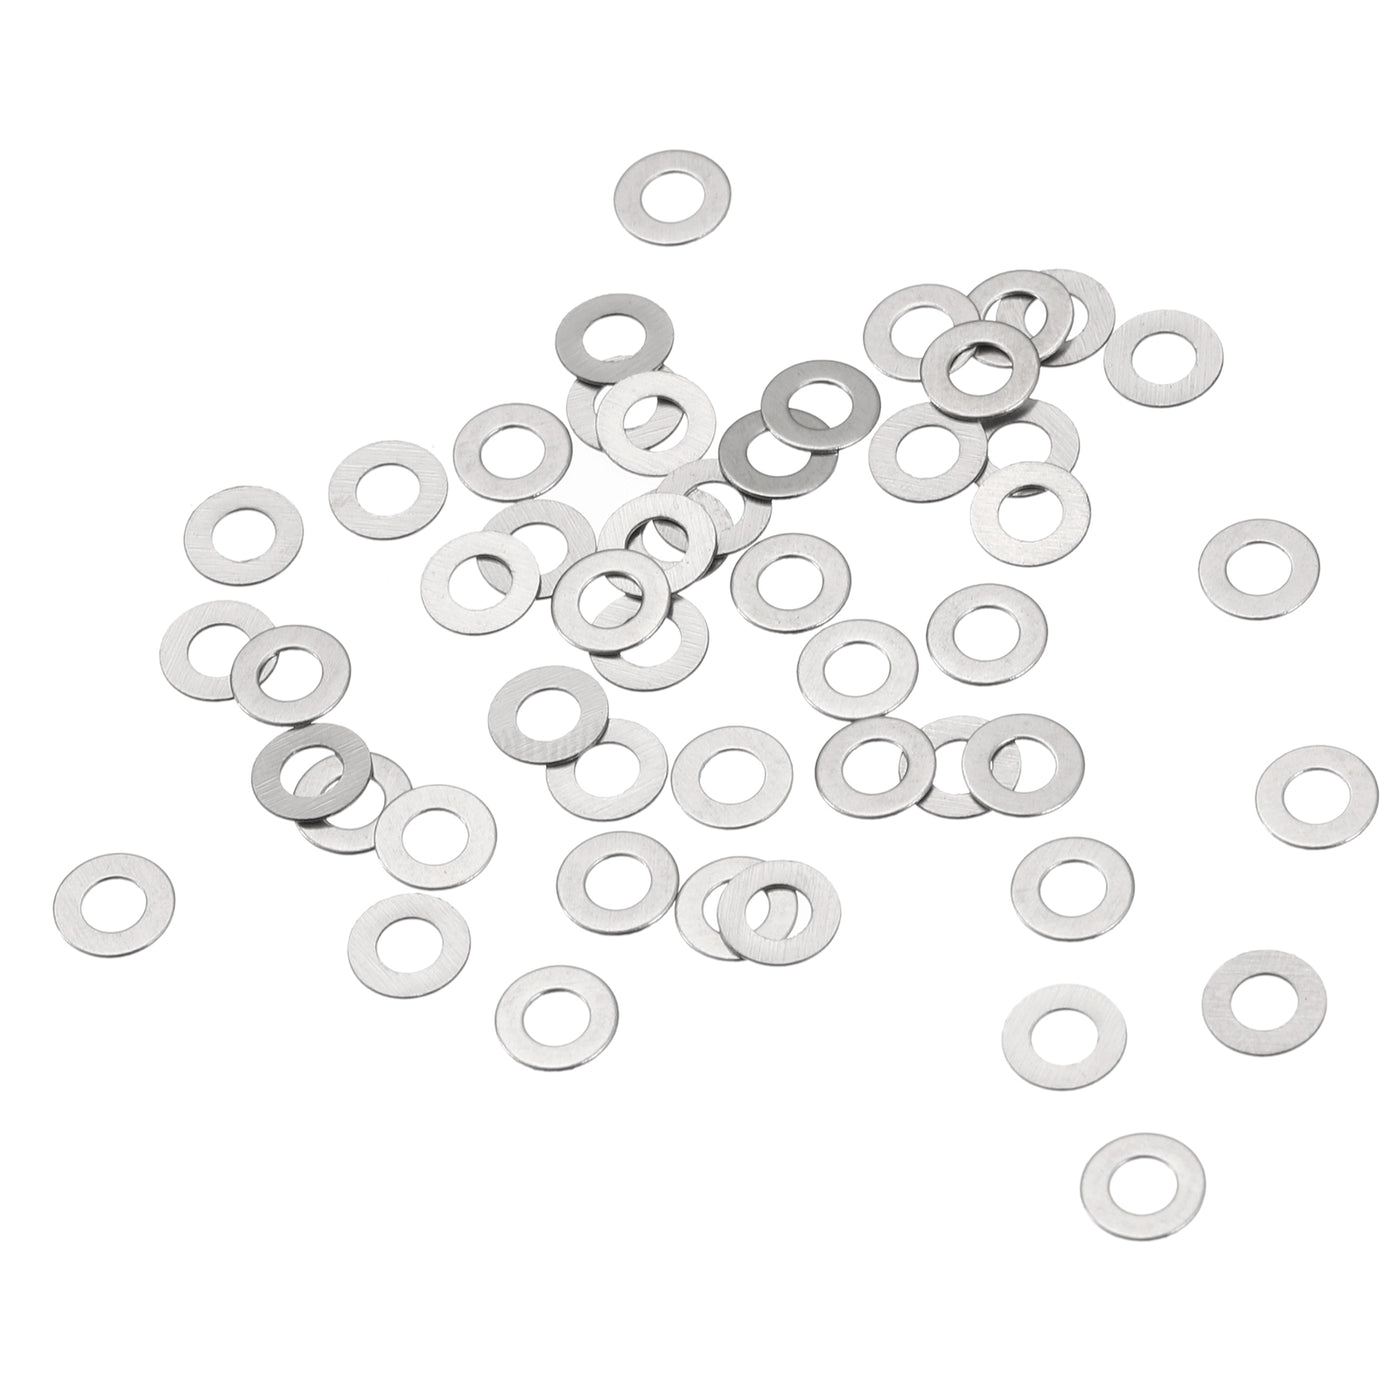 uxcell Uxcell M3 304 Stainless Steel Flat Washers, 50pcs 3x6x0.3mm Ultra Thin Flat Spacers